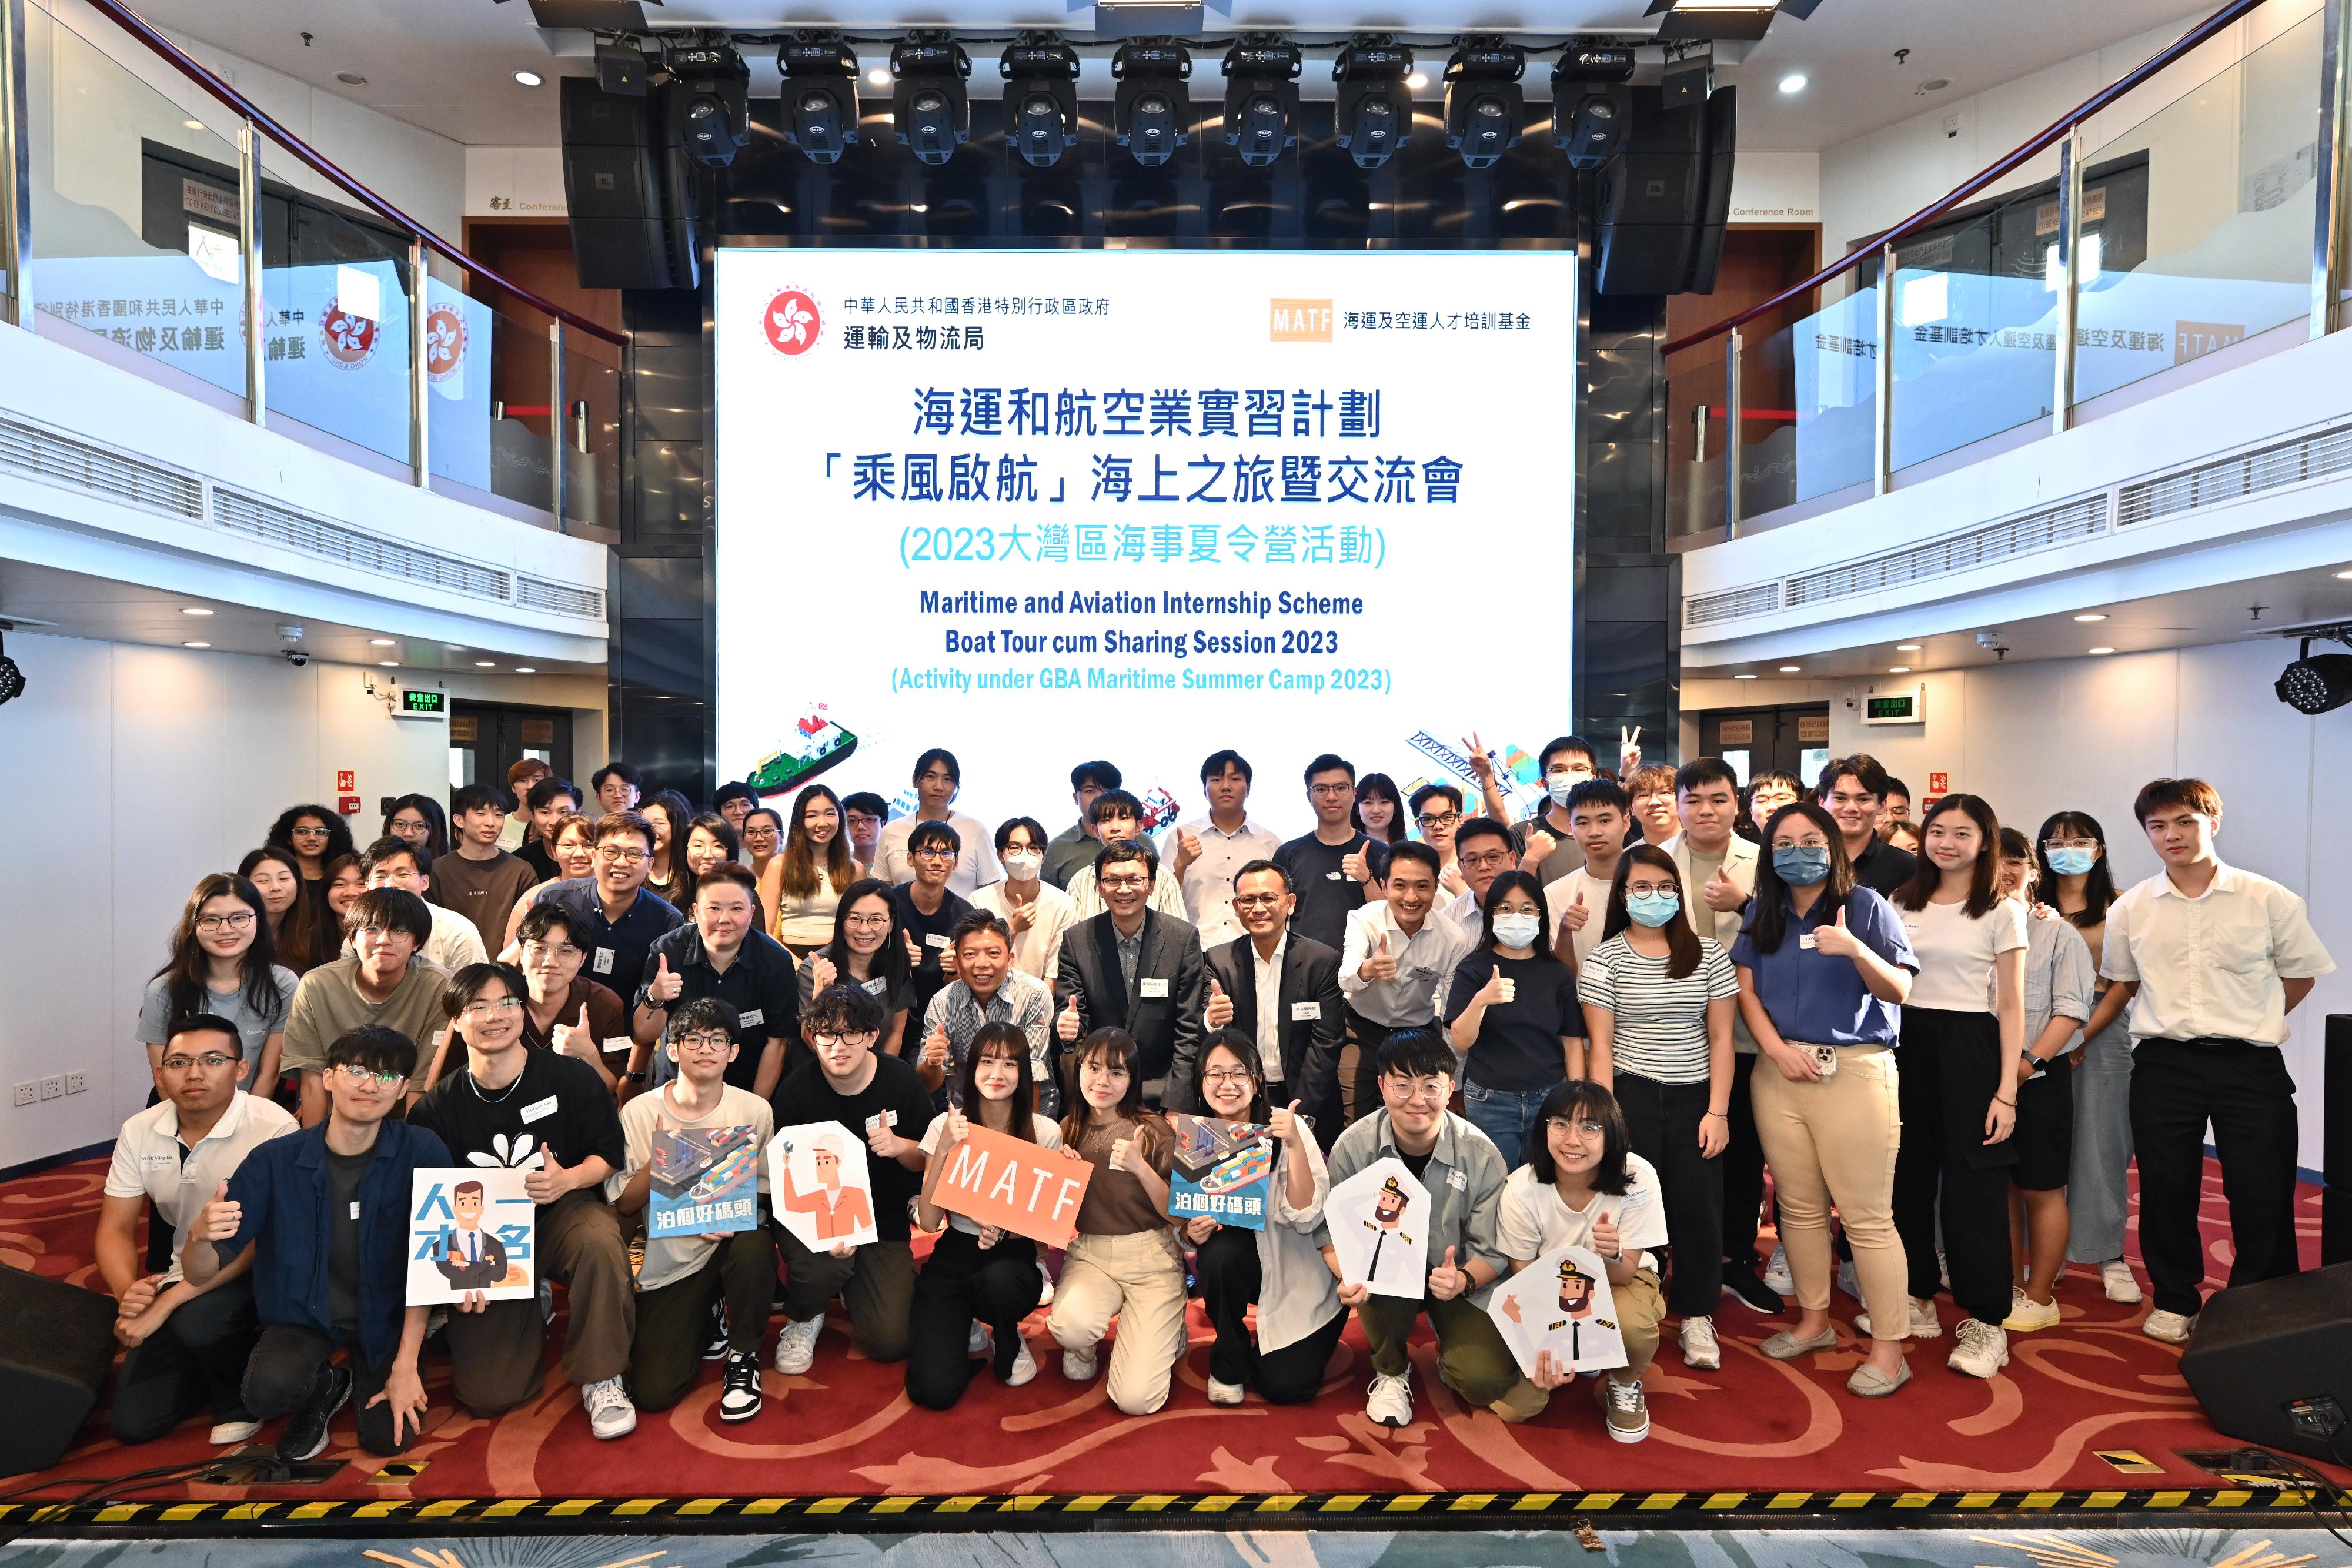 The Acting Secretary for Transport and Logistics, Mr Liu Chun-san (second row, centre), Deputy Secretary for Transport and Logistics Ms Amy Chan (second row, fifth left) and Chief Assistant Secretary for Transport and Logistics Miss Carmen Chan (second row, fourth left), together with representatives from the Marine Department and the maritime industry, pose for a group photo with participants at the Maritime and Aviation Internship Scheme Boat Tour cum Sharing Session today (July 14).